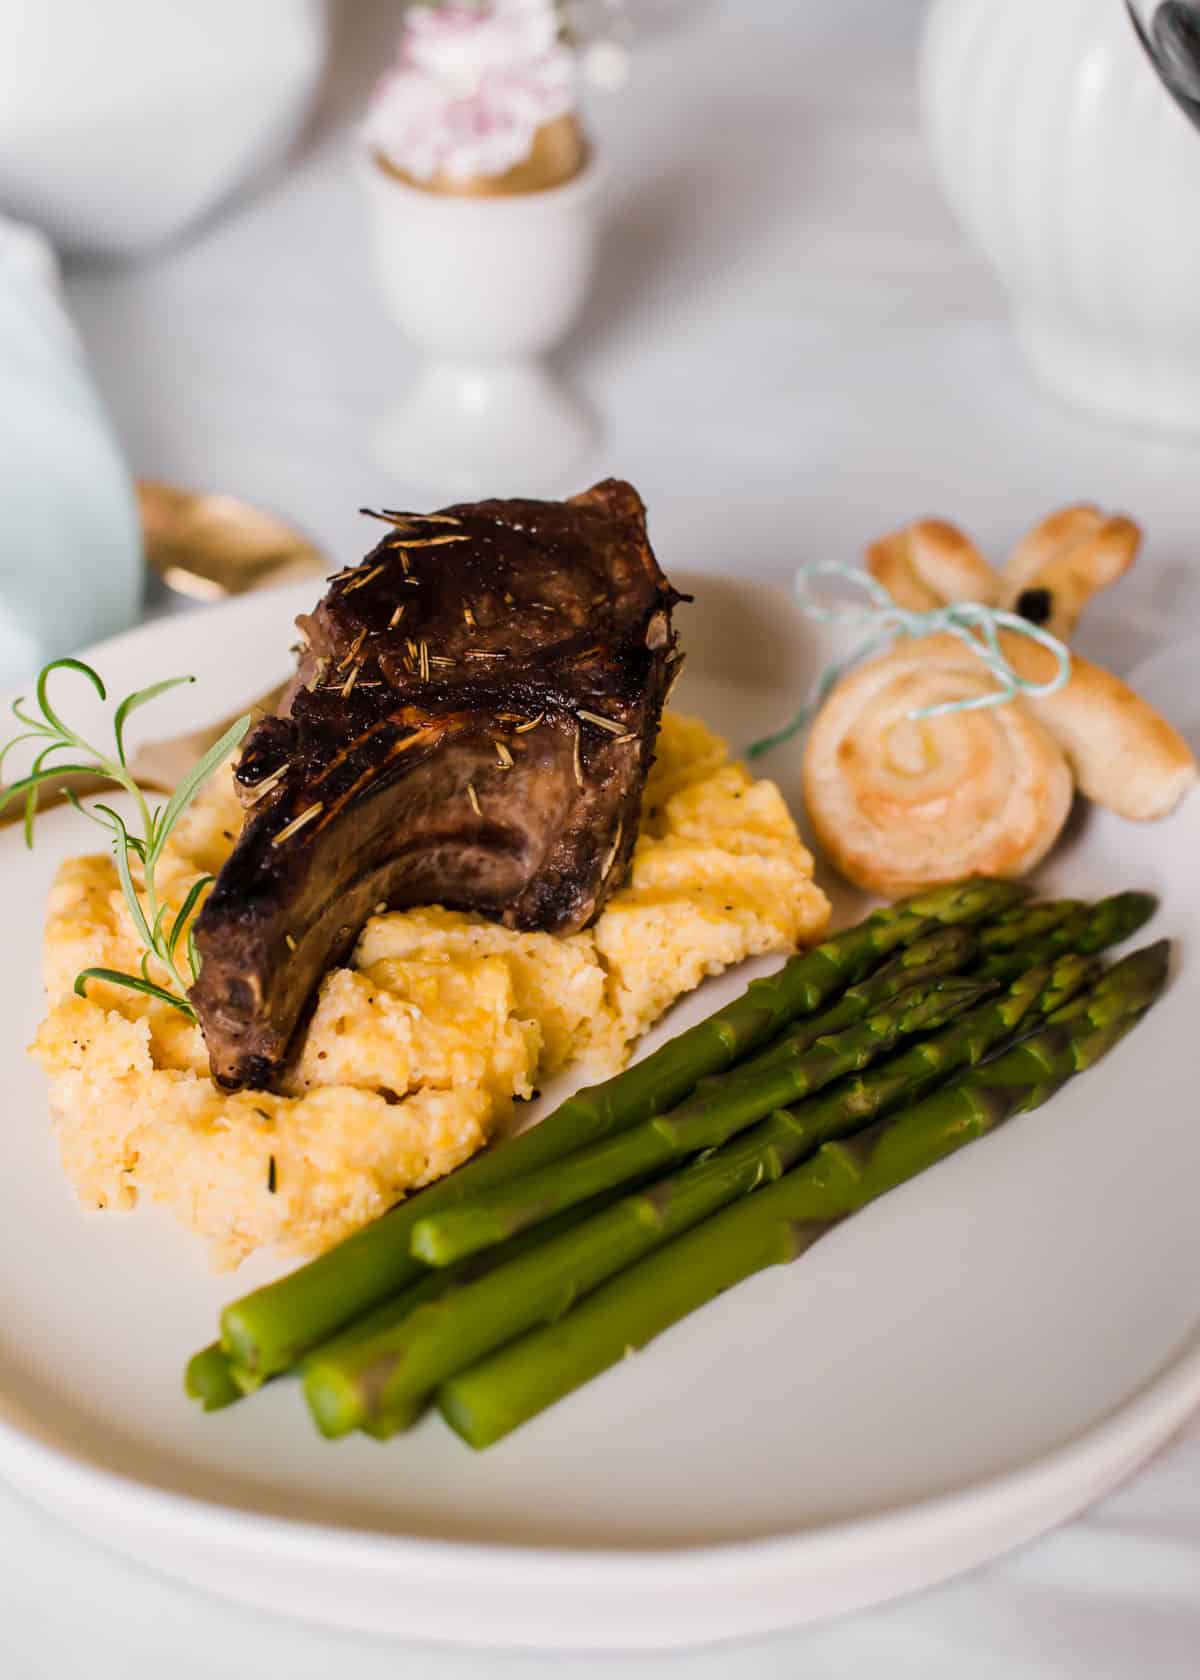 lamb chop on bed of polenta with asparagus and bunny roll on plate.